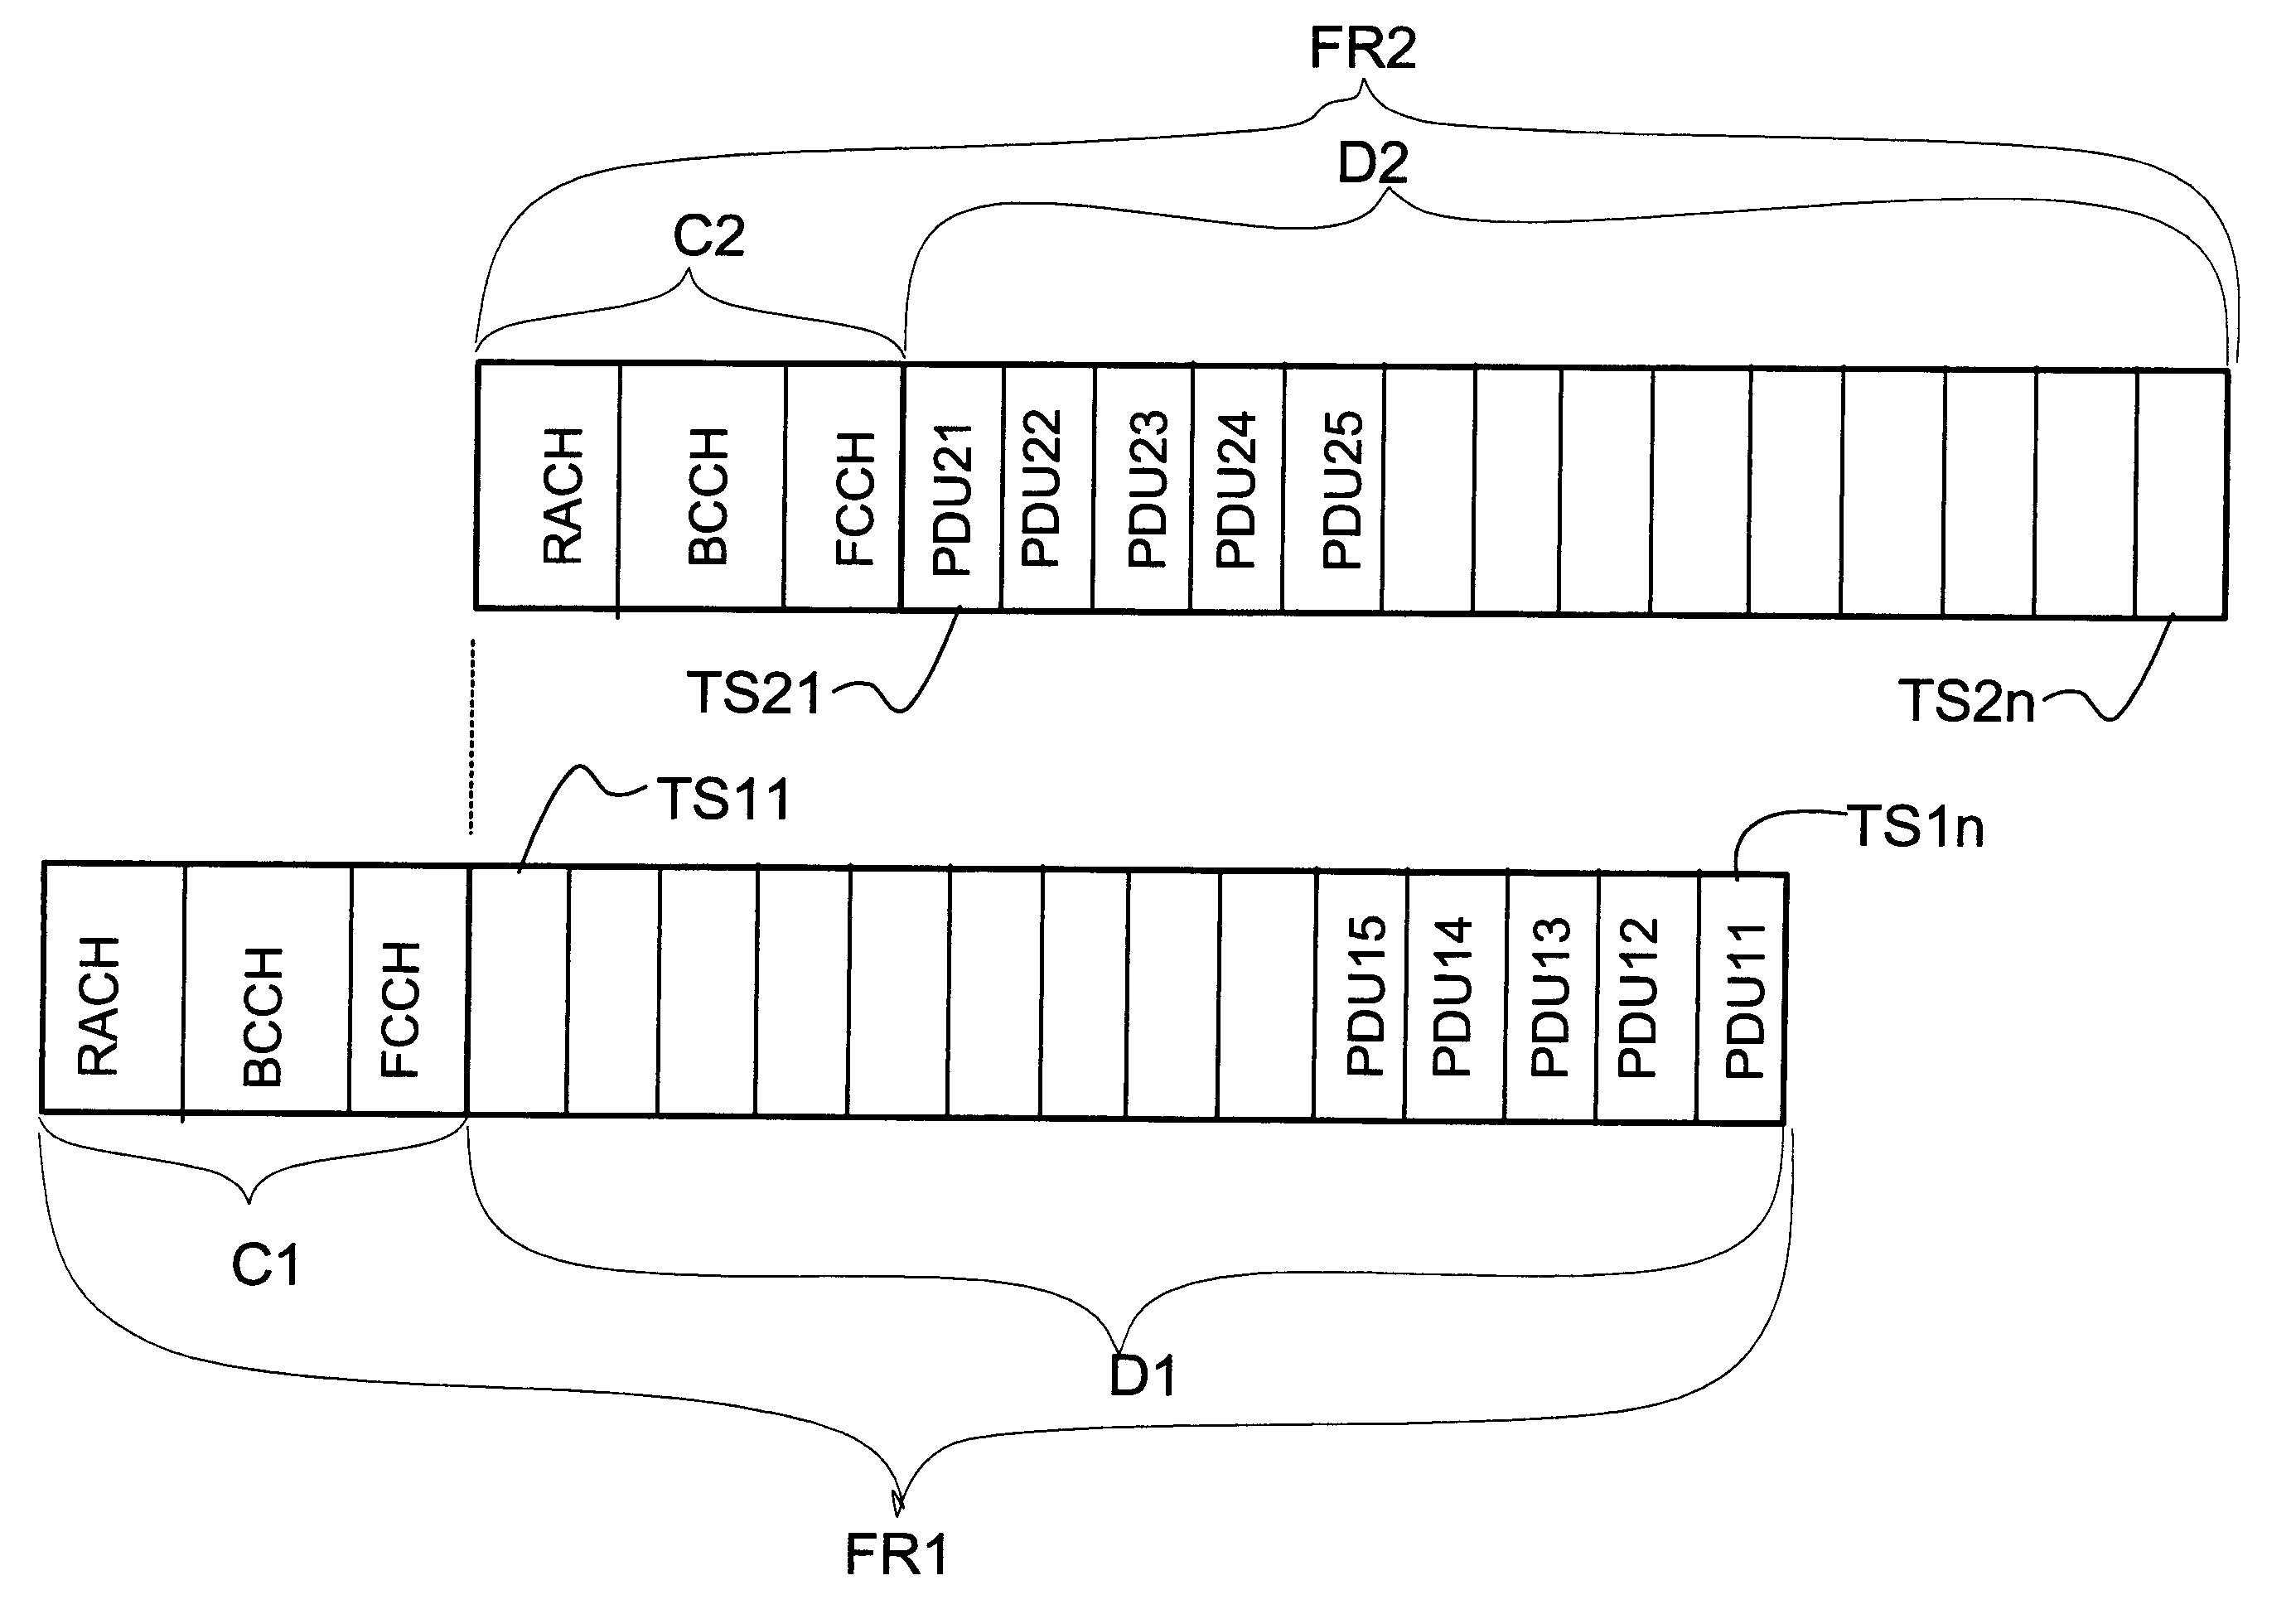 Efficient bandwidth allocation for high speed wireless data transmission system